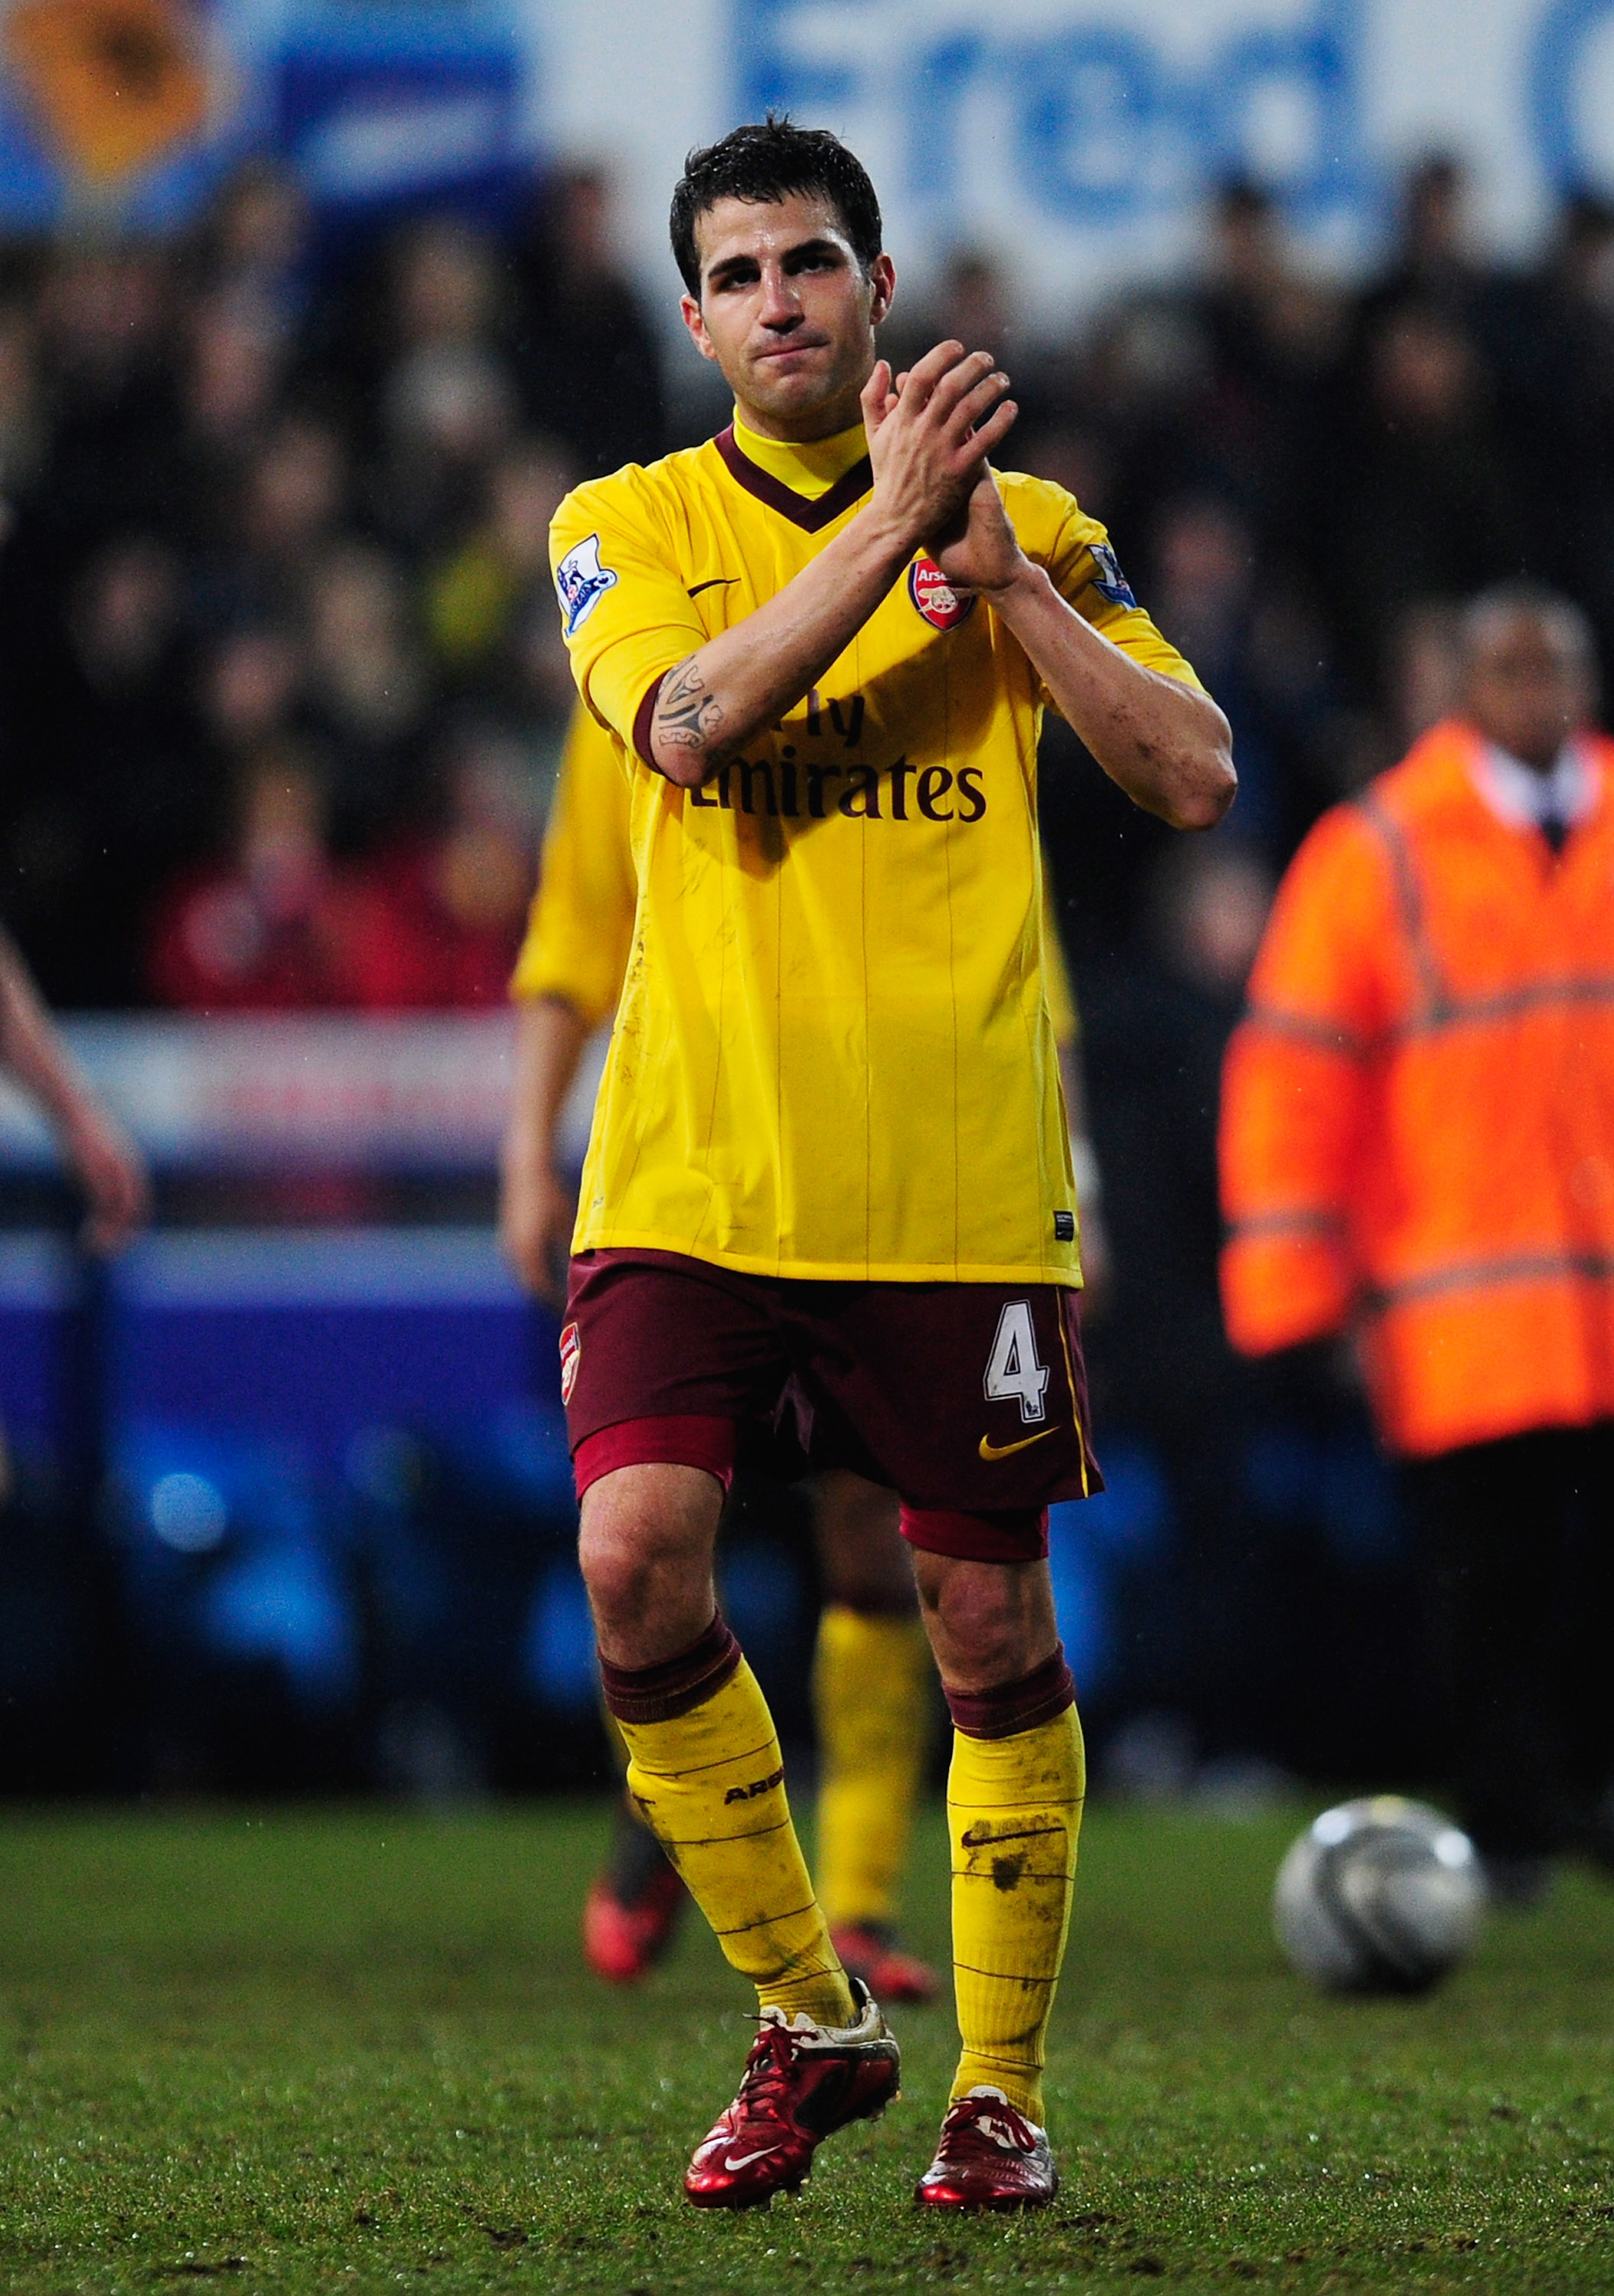 IPSWICH, ENGLAND - JANUARY 12:  Cesc Fabregas of Arsenal looks dejected after the Carling Cup Semi Final First Leg match between Ipswich Town and Arsenal at Portman Road on January 12, 2011 in Ipswich, England.  (Photo by Jamie McDonald/Getty Images)